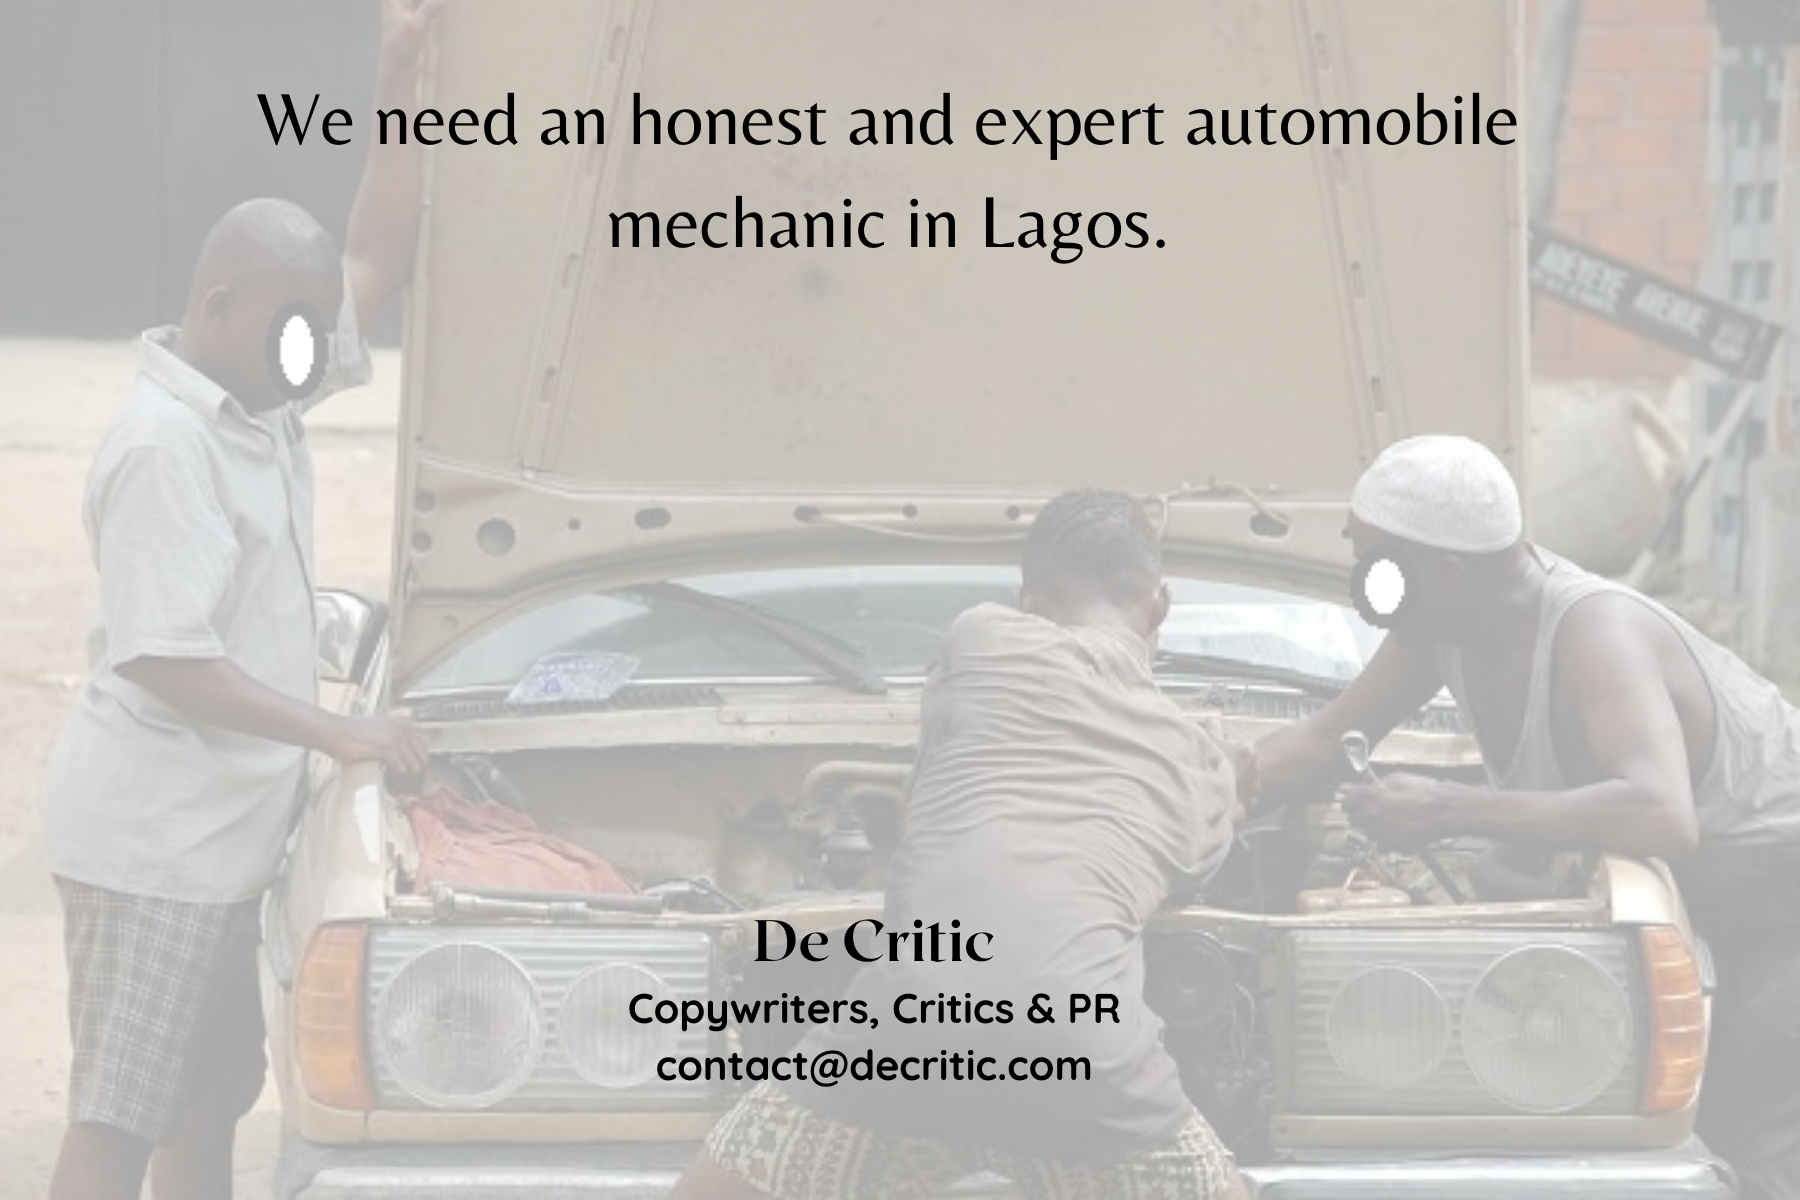 We need an honest and expert automobile mechanic in Lagos.